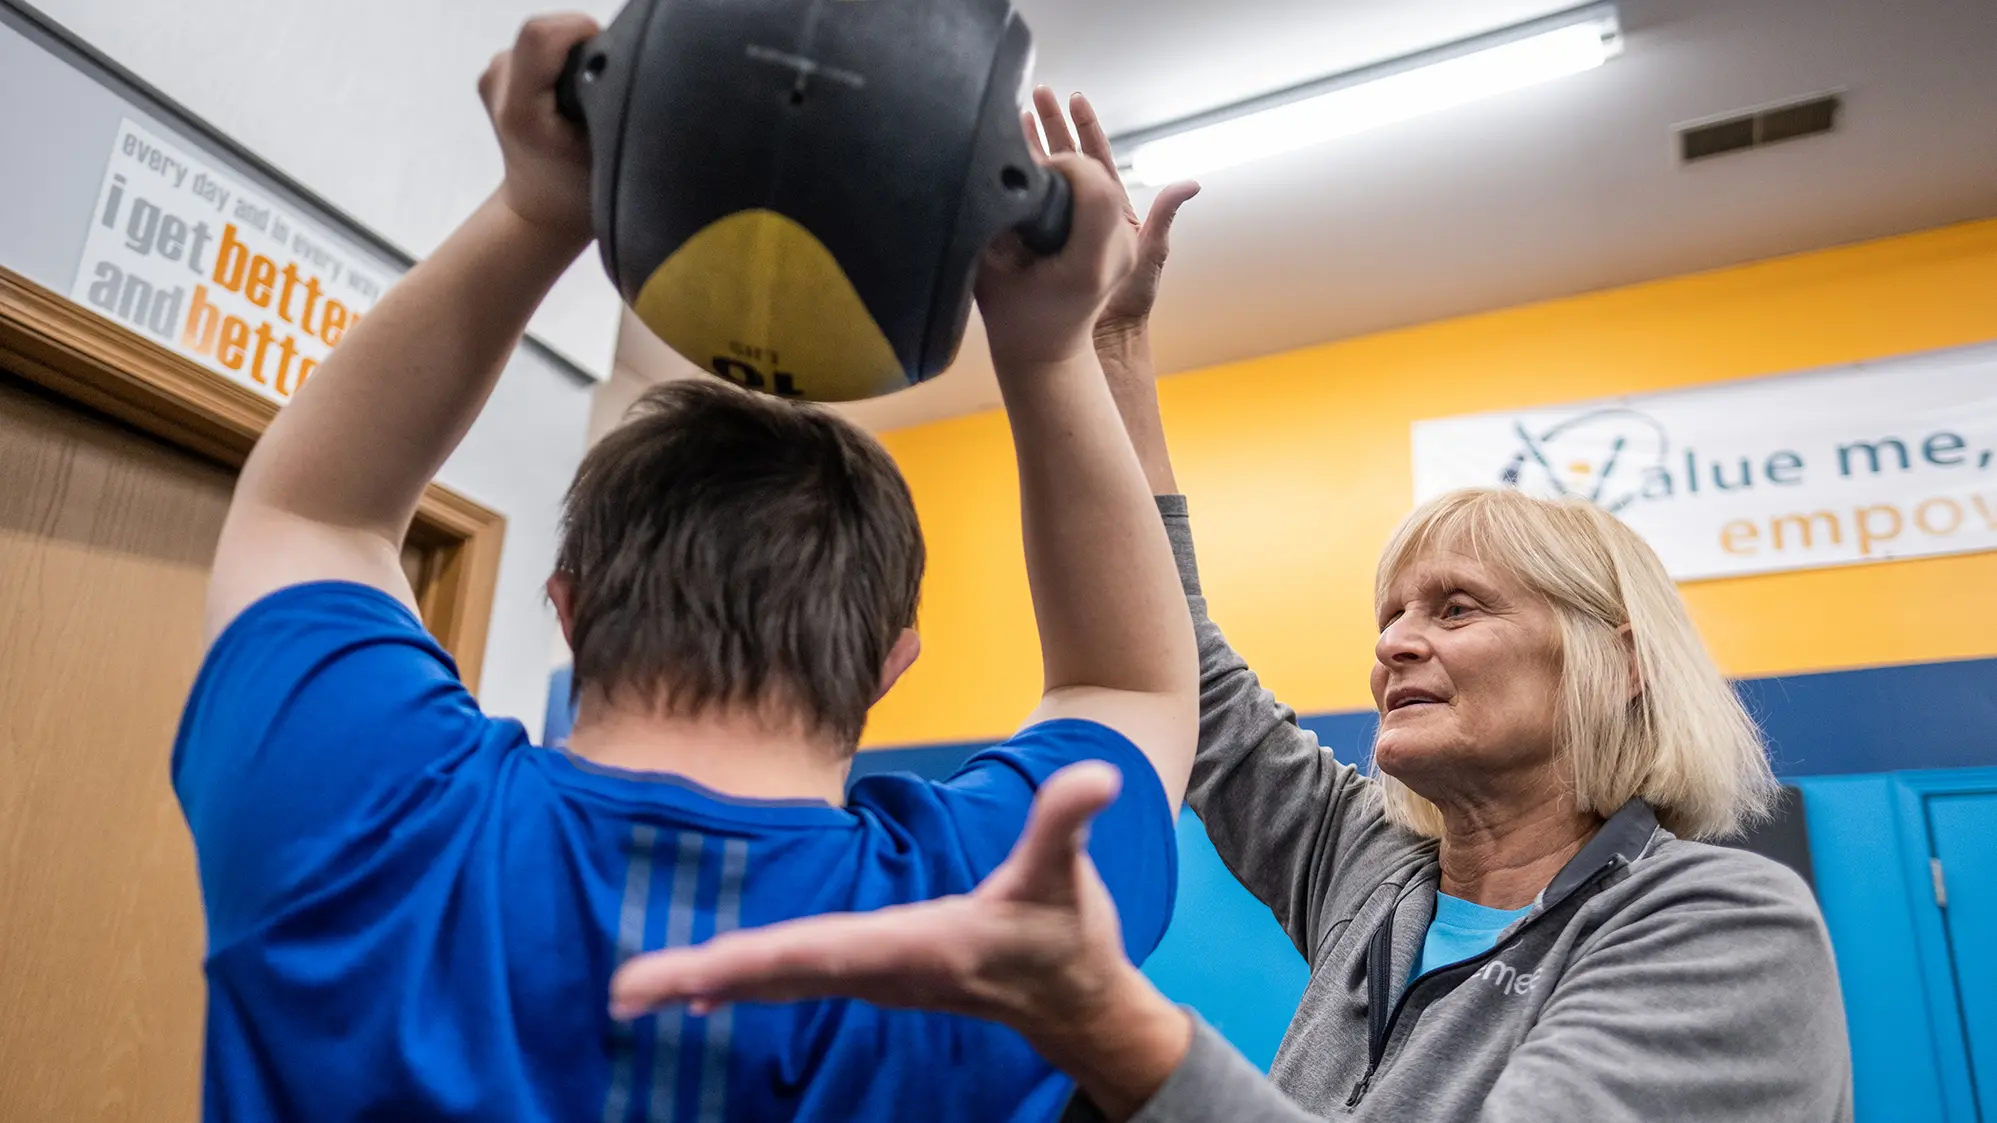 An older woman with blond hair vaguely smiles as she stands at the side of a man with intellectual or developmental disabilities lifting a medicine ball above his head. She's spotting him and as such, has her hands up and ready to grab the ball if he loses control. He can only be seen from behind.